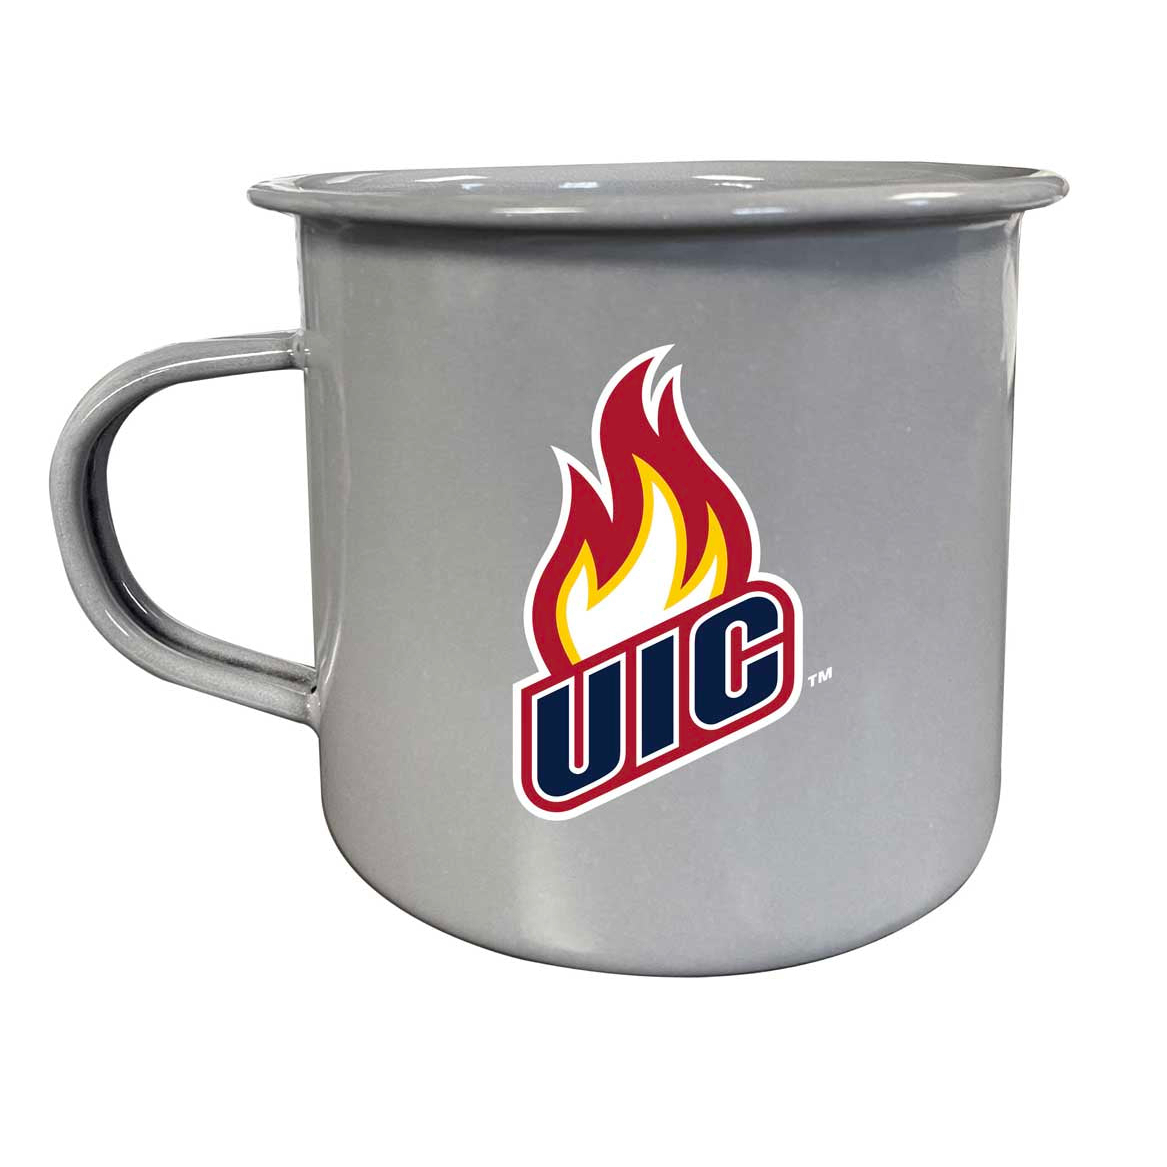 University Of Illinois At Chicago Tin Camper Coffee Mug - Choose Your Color - White